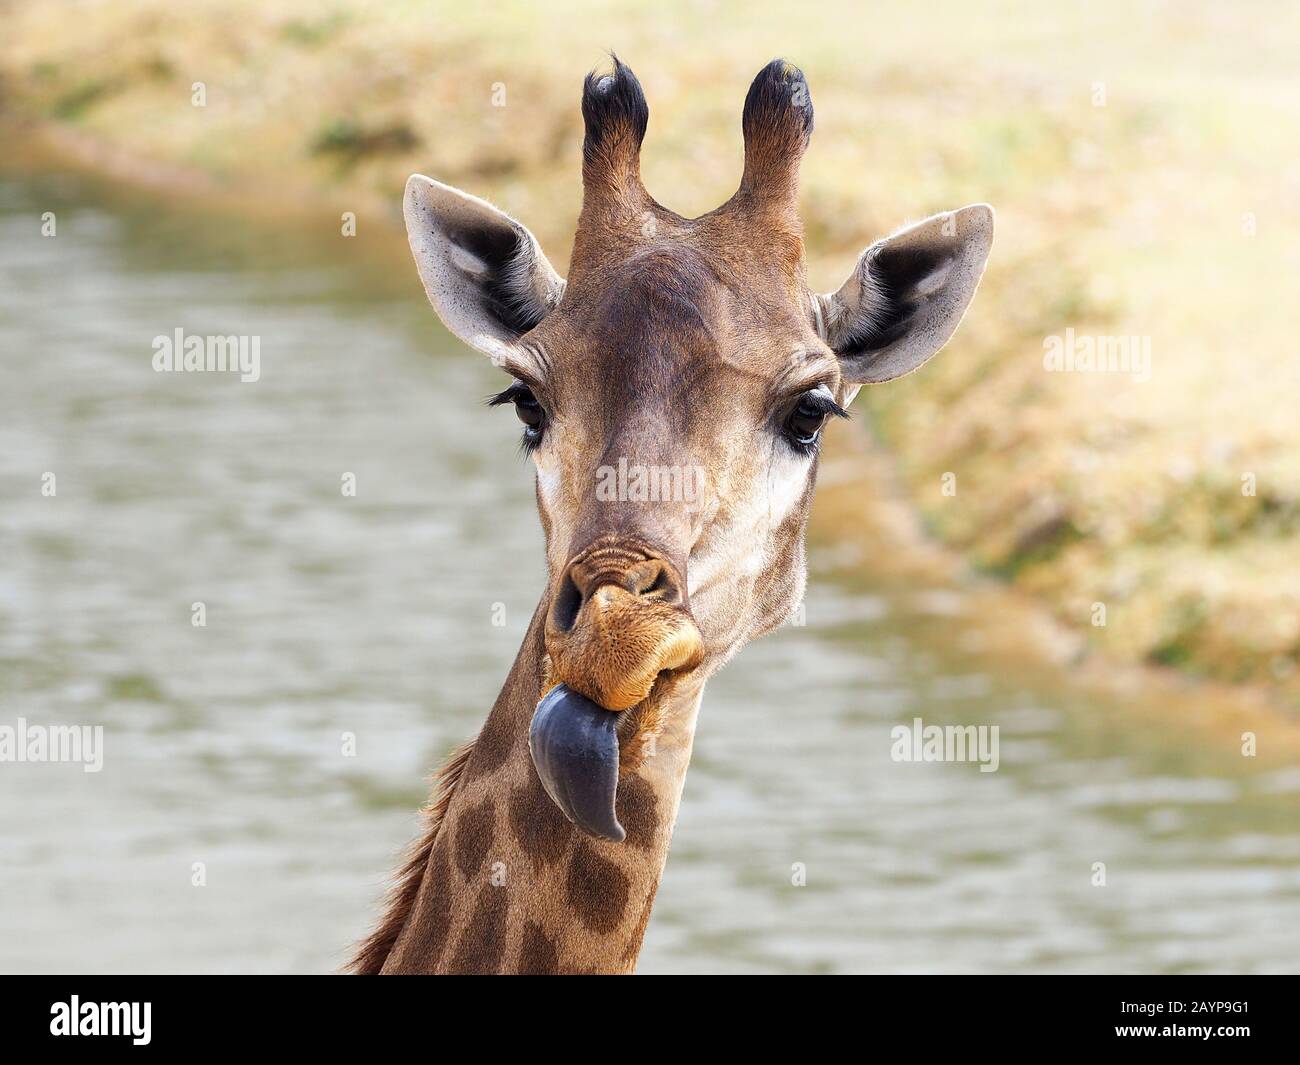 Portrait of a funny giraffe with a blue tongue on a blurry background. Stock Photo